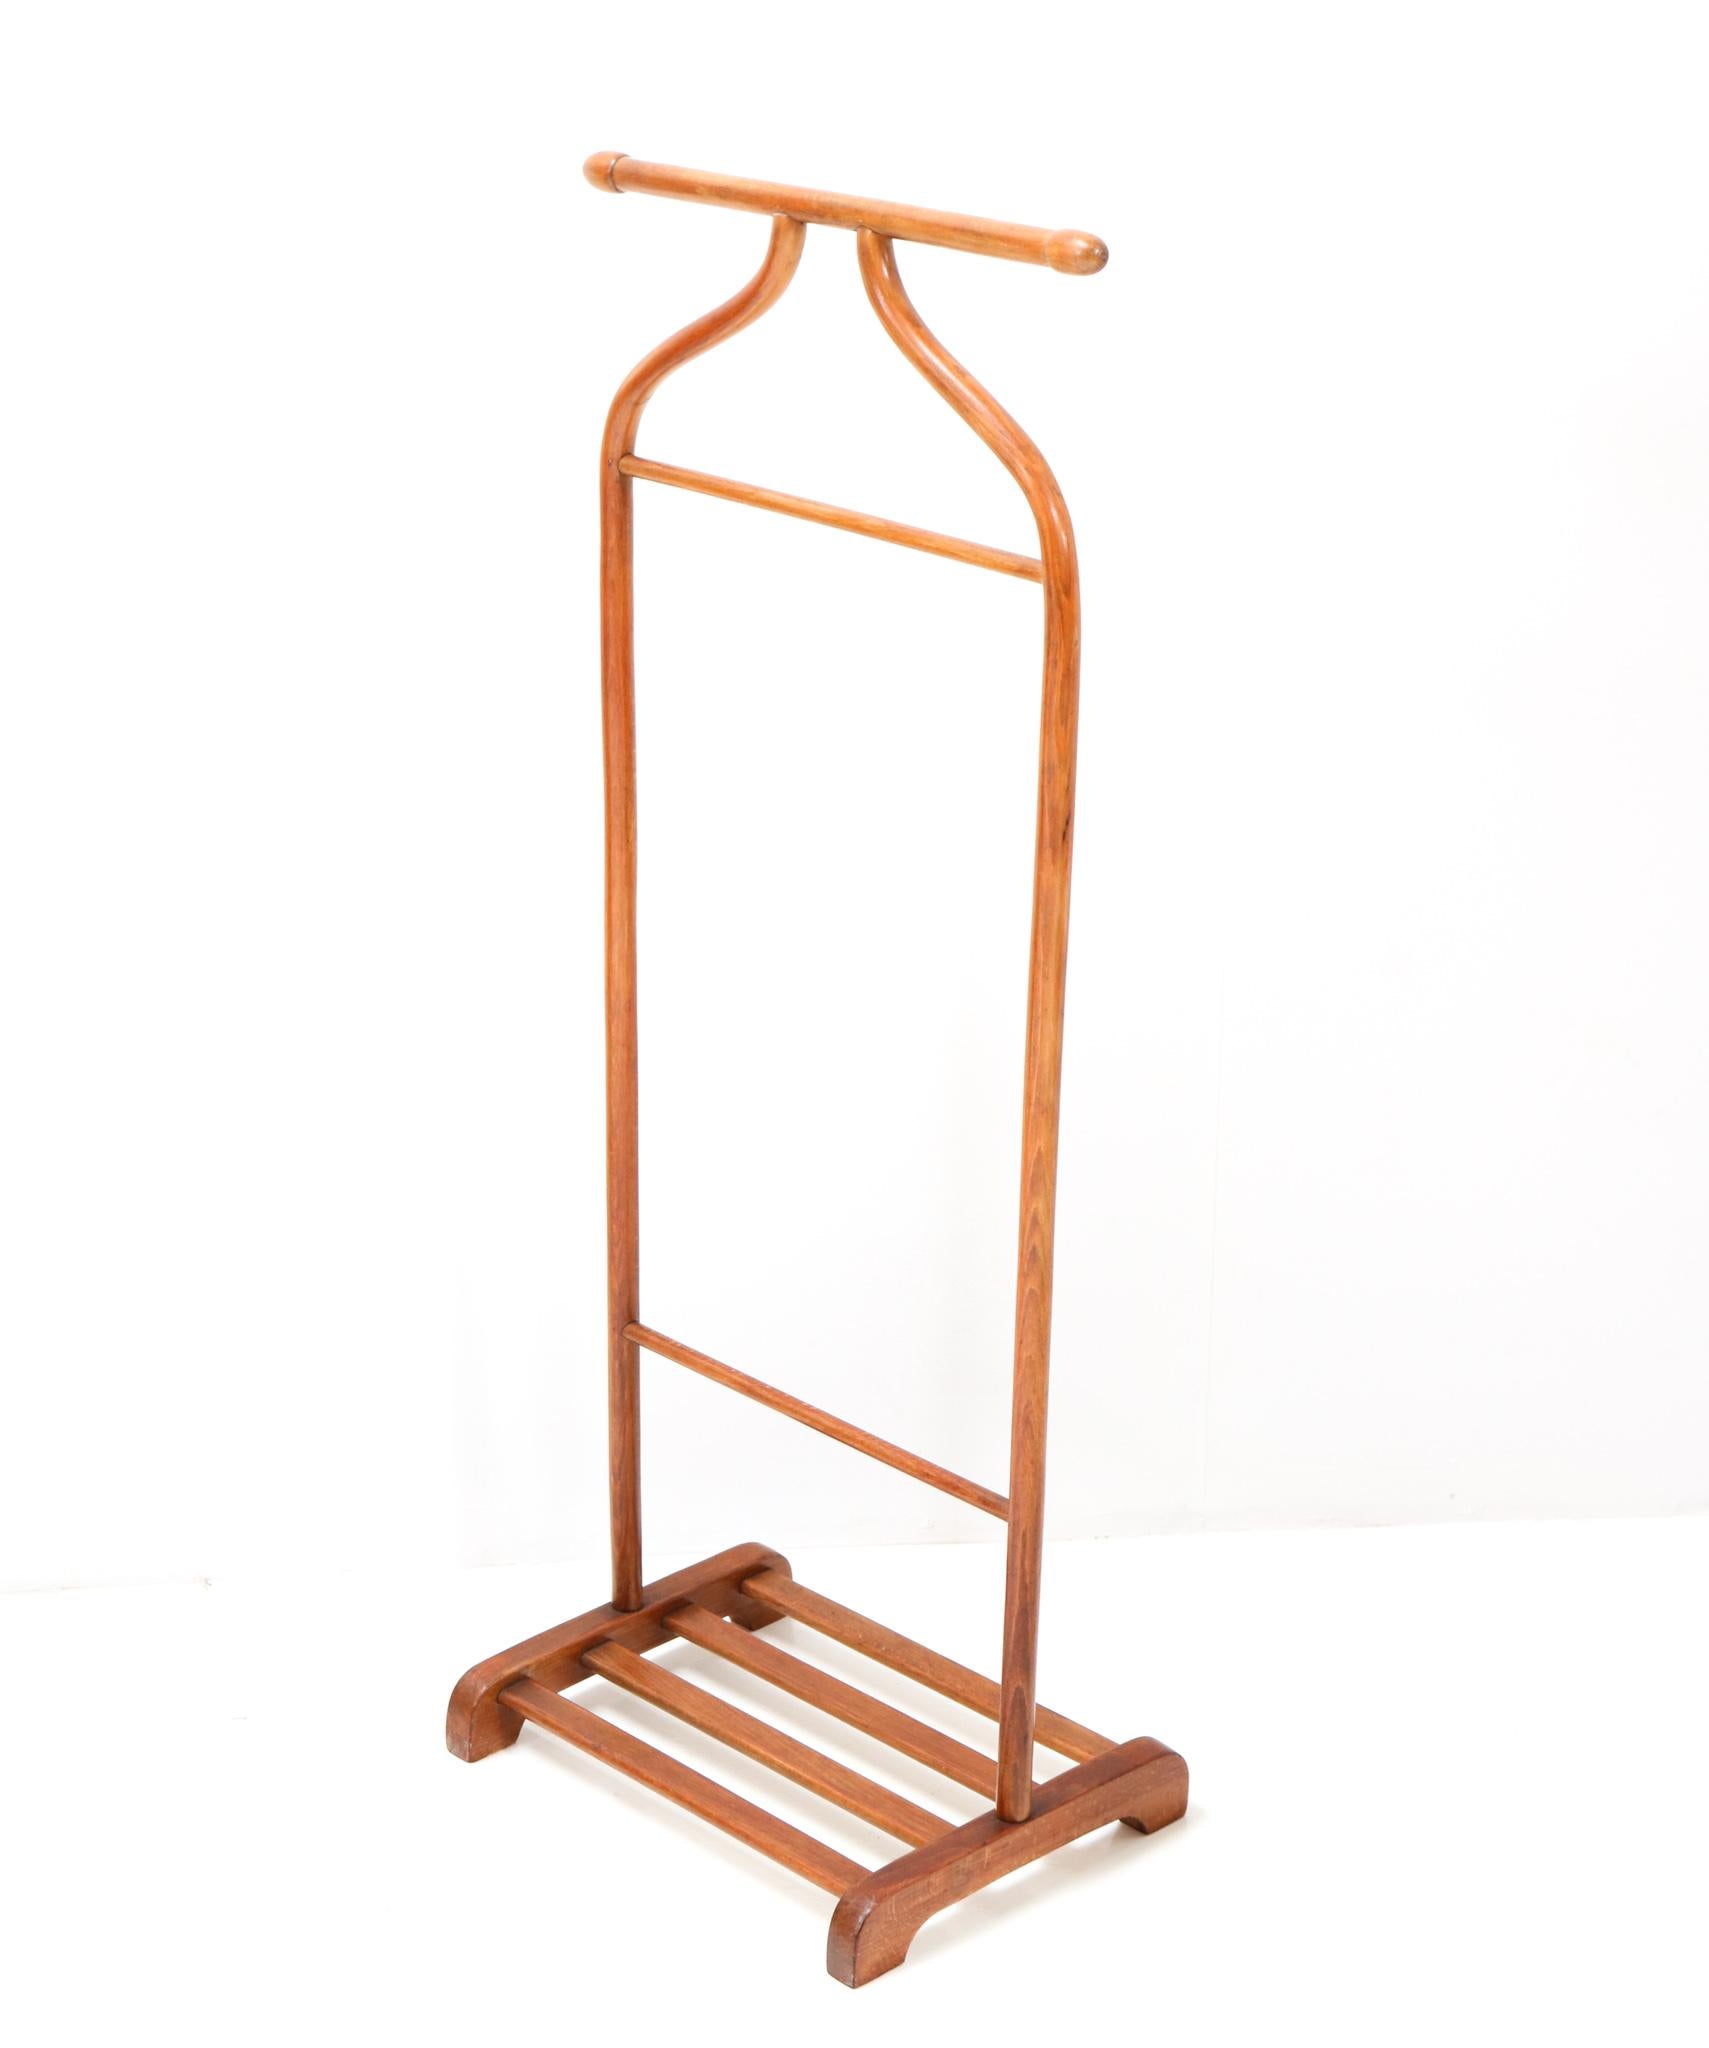 Austrian Art Deco Stained Beech Bentwood Valet Stand or Rack by Thonet Vienna, 1920s For Sale